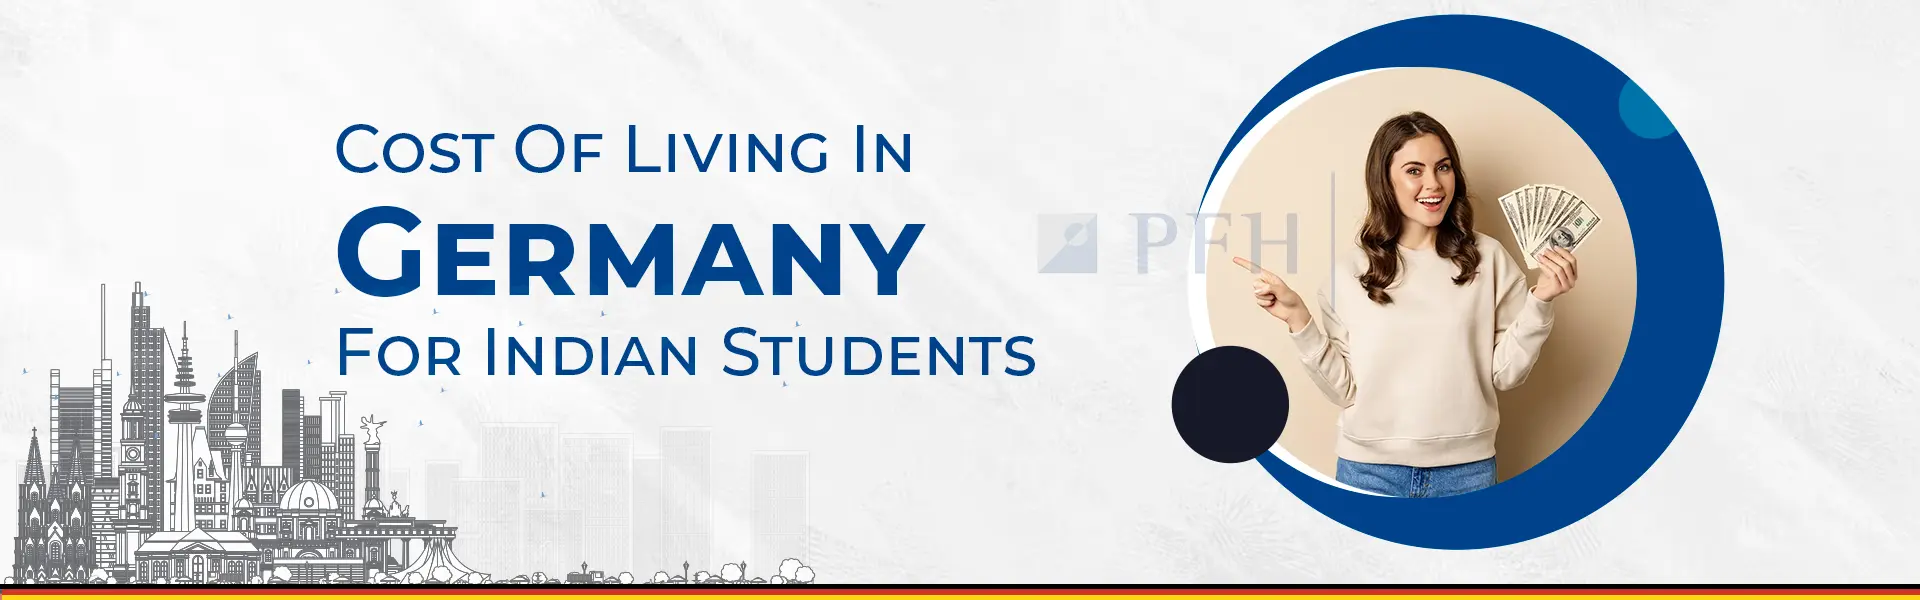 Cost of Living in Germany for Indian Students​